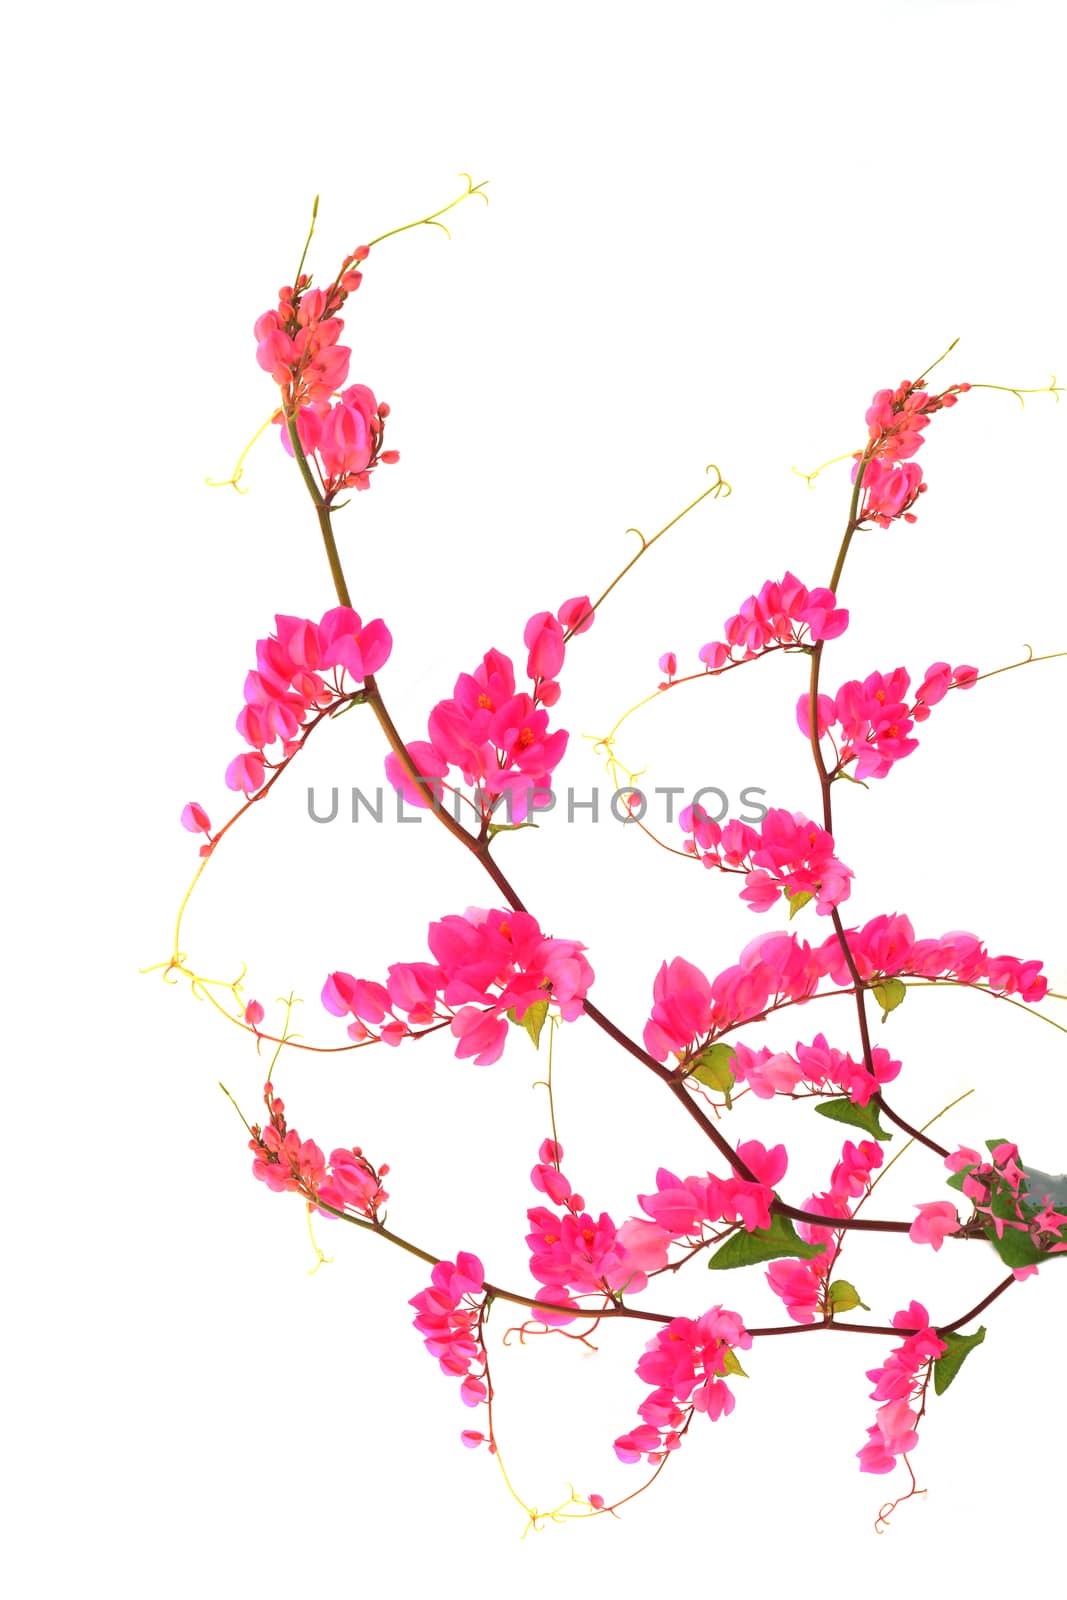 Pink flower on a white background.(Coral Vine, Mexican Creeper, Chain of Love)